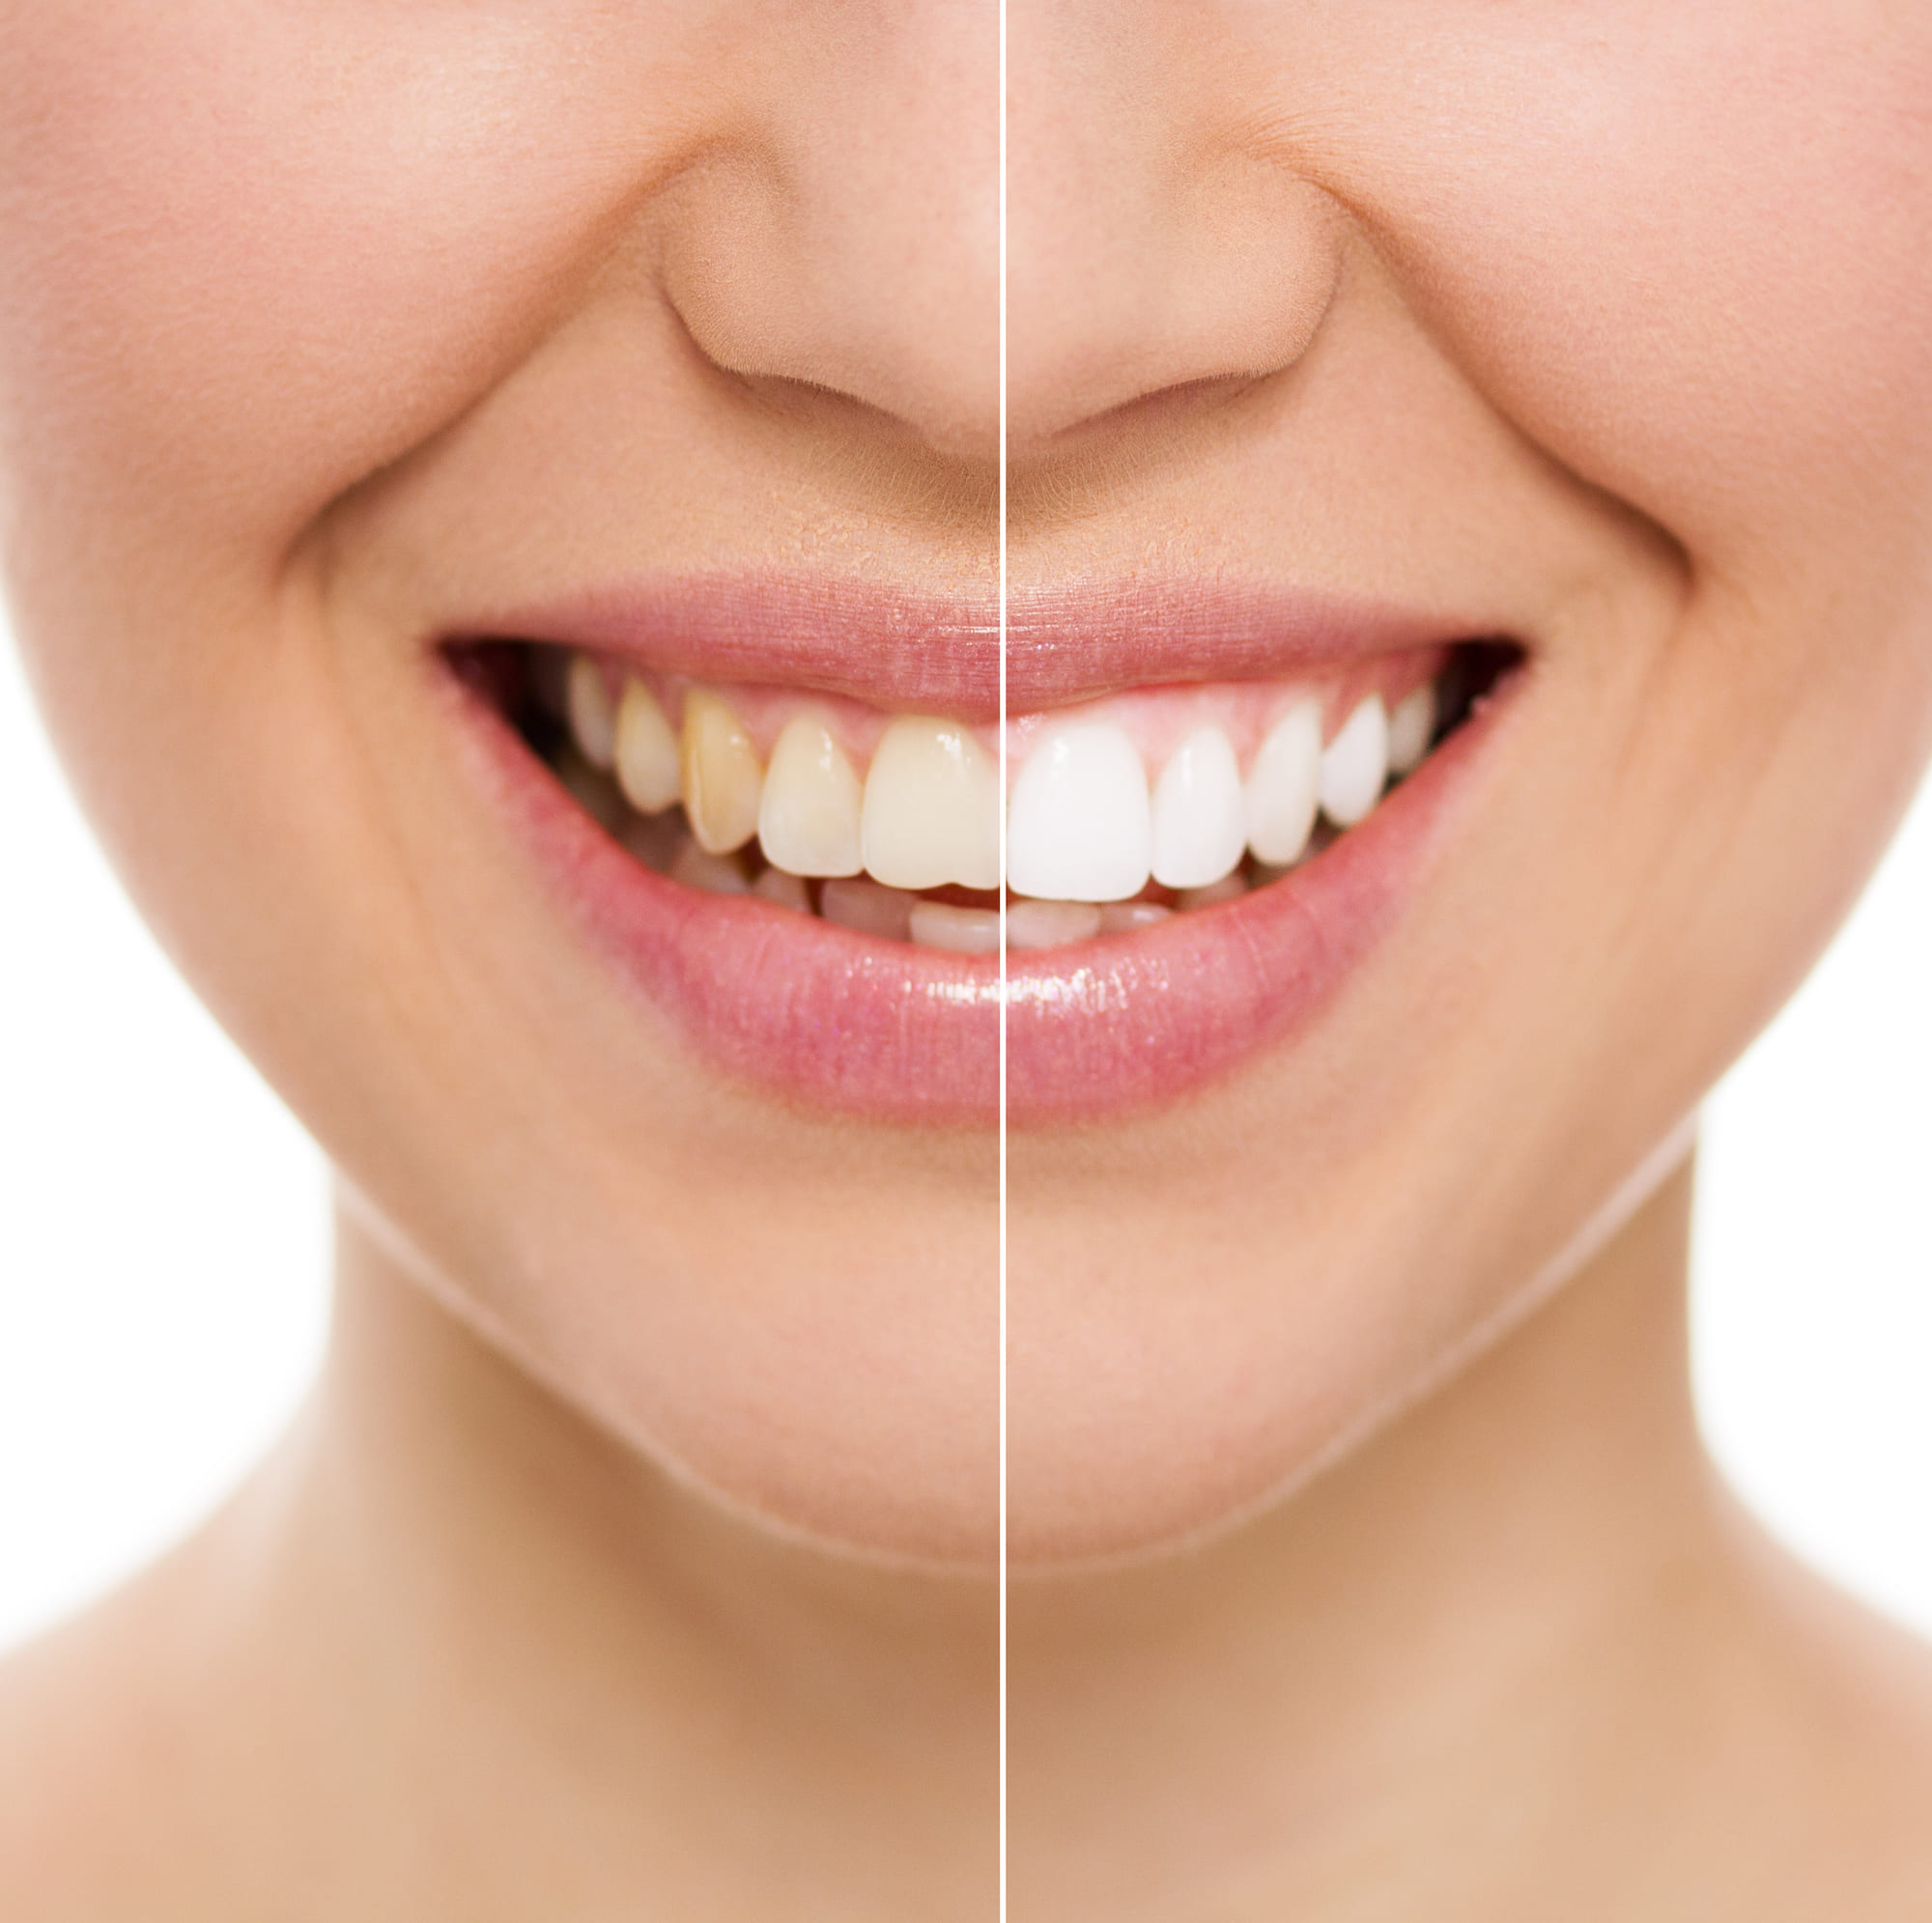 Before and after of teeth whitening treatment